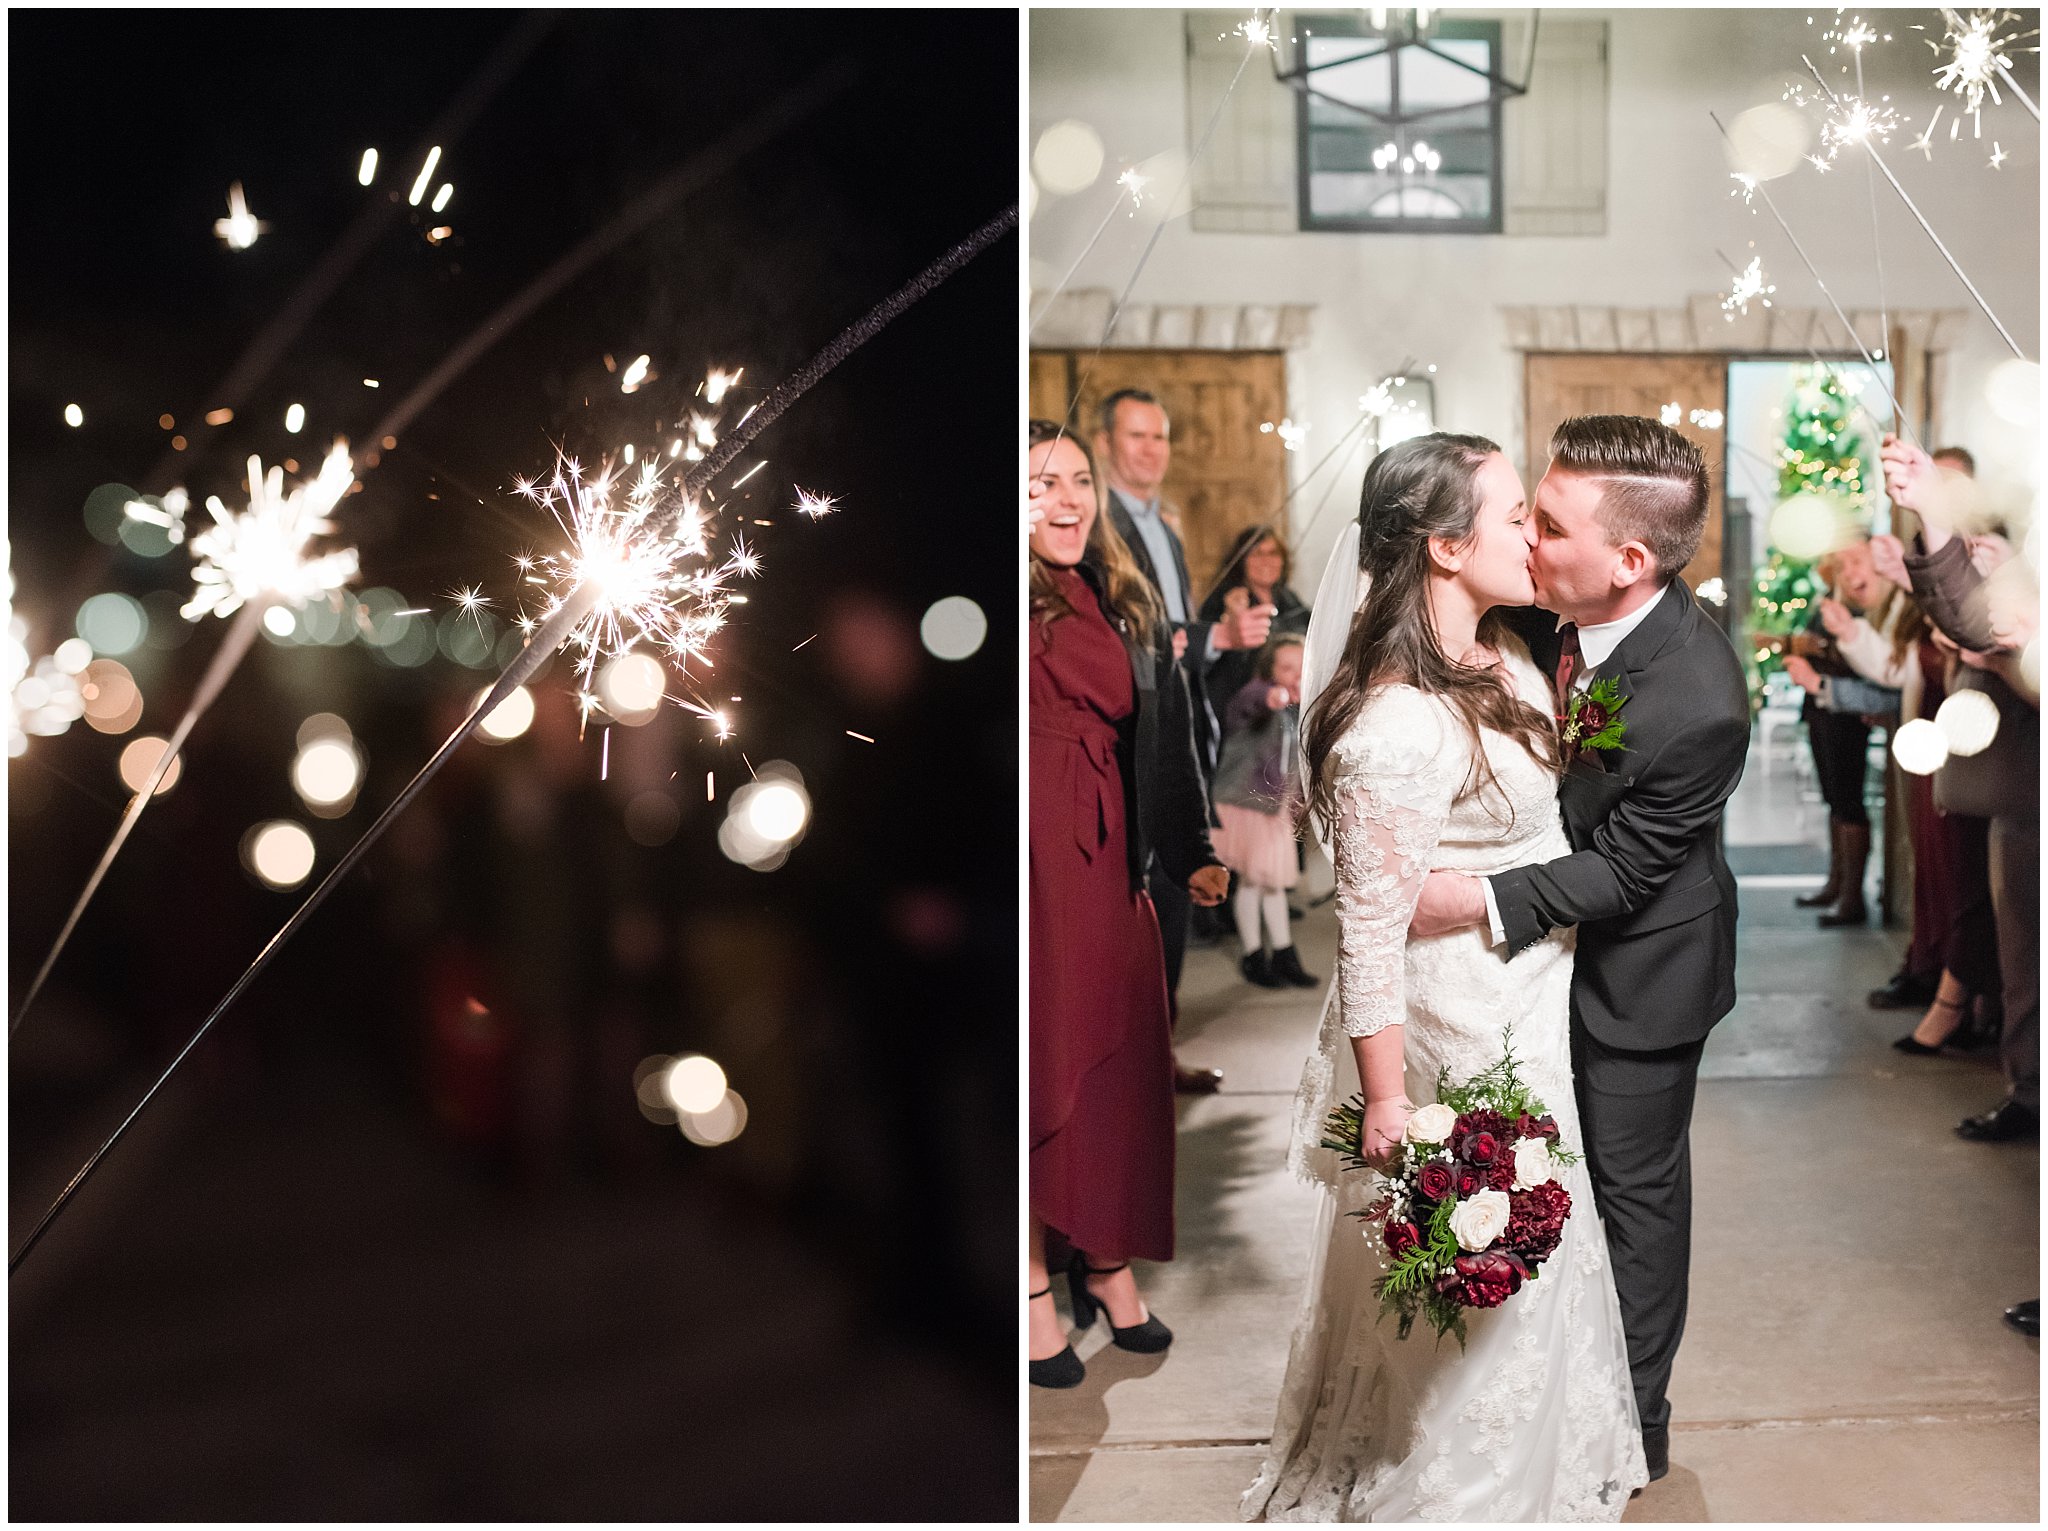 Sparkler Exit at the Gathering Place at Gardner Village | Gardner Village Wedding | The Gathering Place | Jessie and Dallin Photography